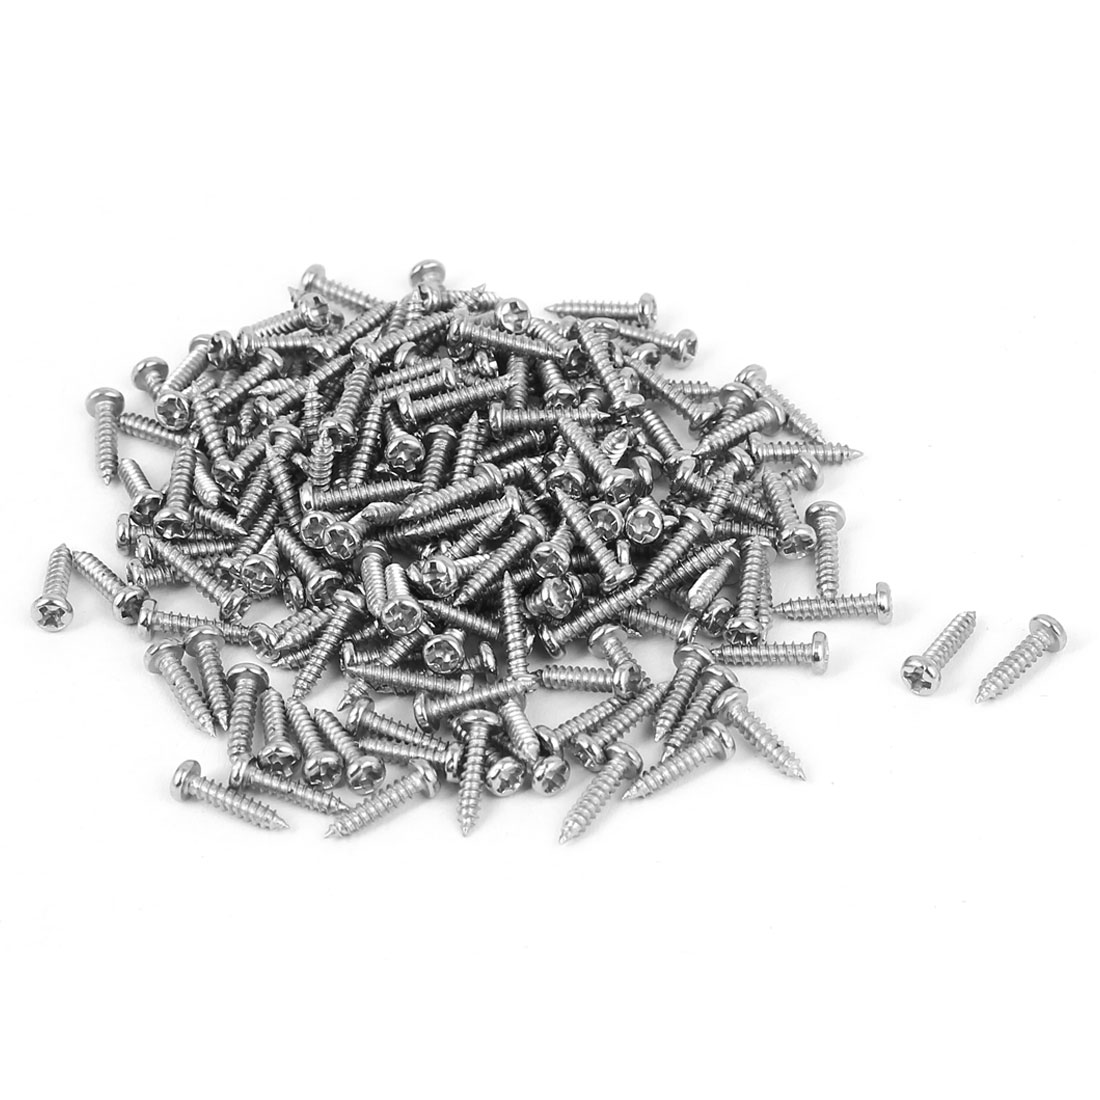 Unique Bargains M1.7x8mm Thread Nickel Plated  Round Head Self Tapping Screws 200pcs - image 1 of 1